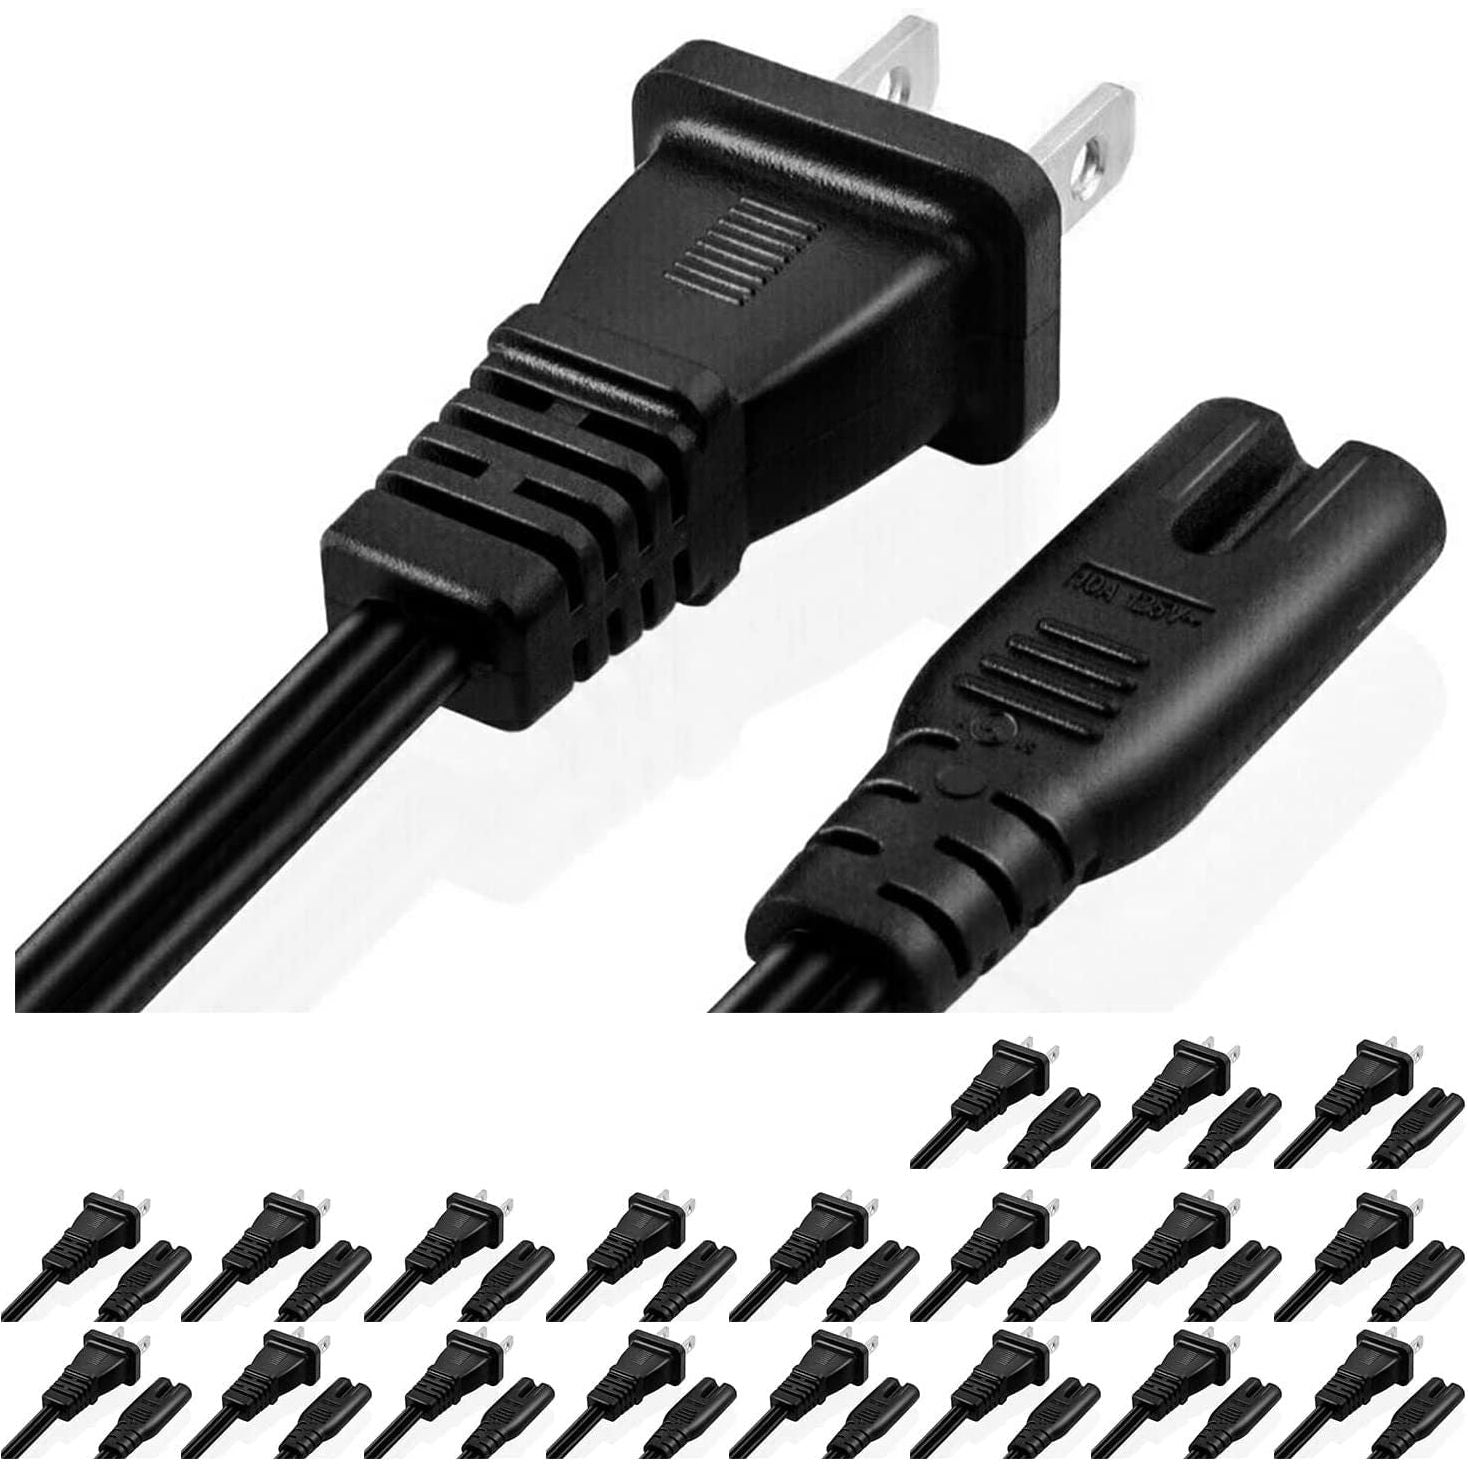 5 Core Extra Long 6ft 2 Prong 2 pack Non-Polarized AC Wall Power Cable 2 Slot Cord for HP Dell Samsung Sony Asus Acer Toshiba Laptop Charger LED LCD Monitor Replacement Power Cord PP 1001